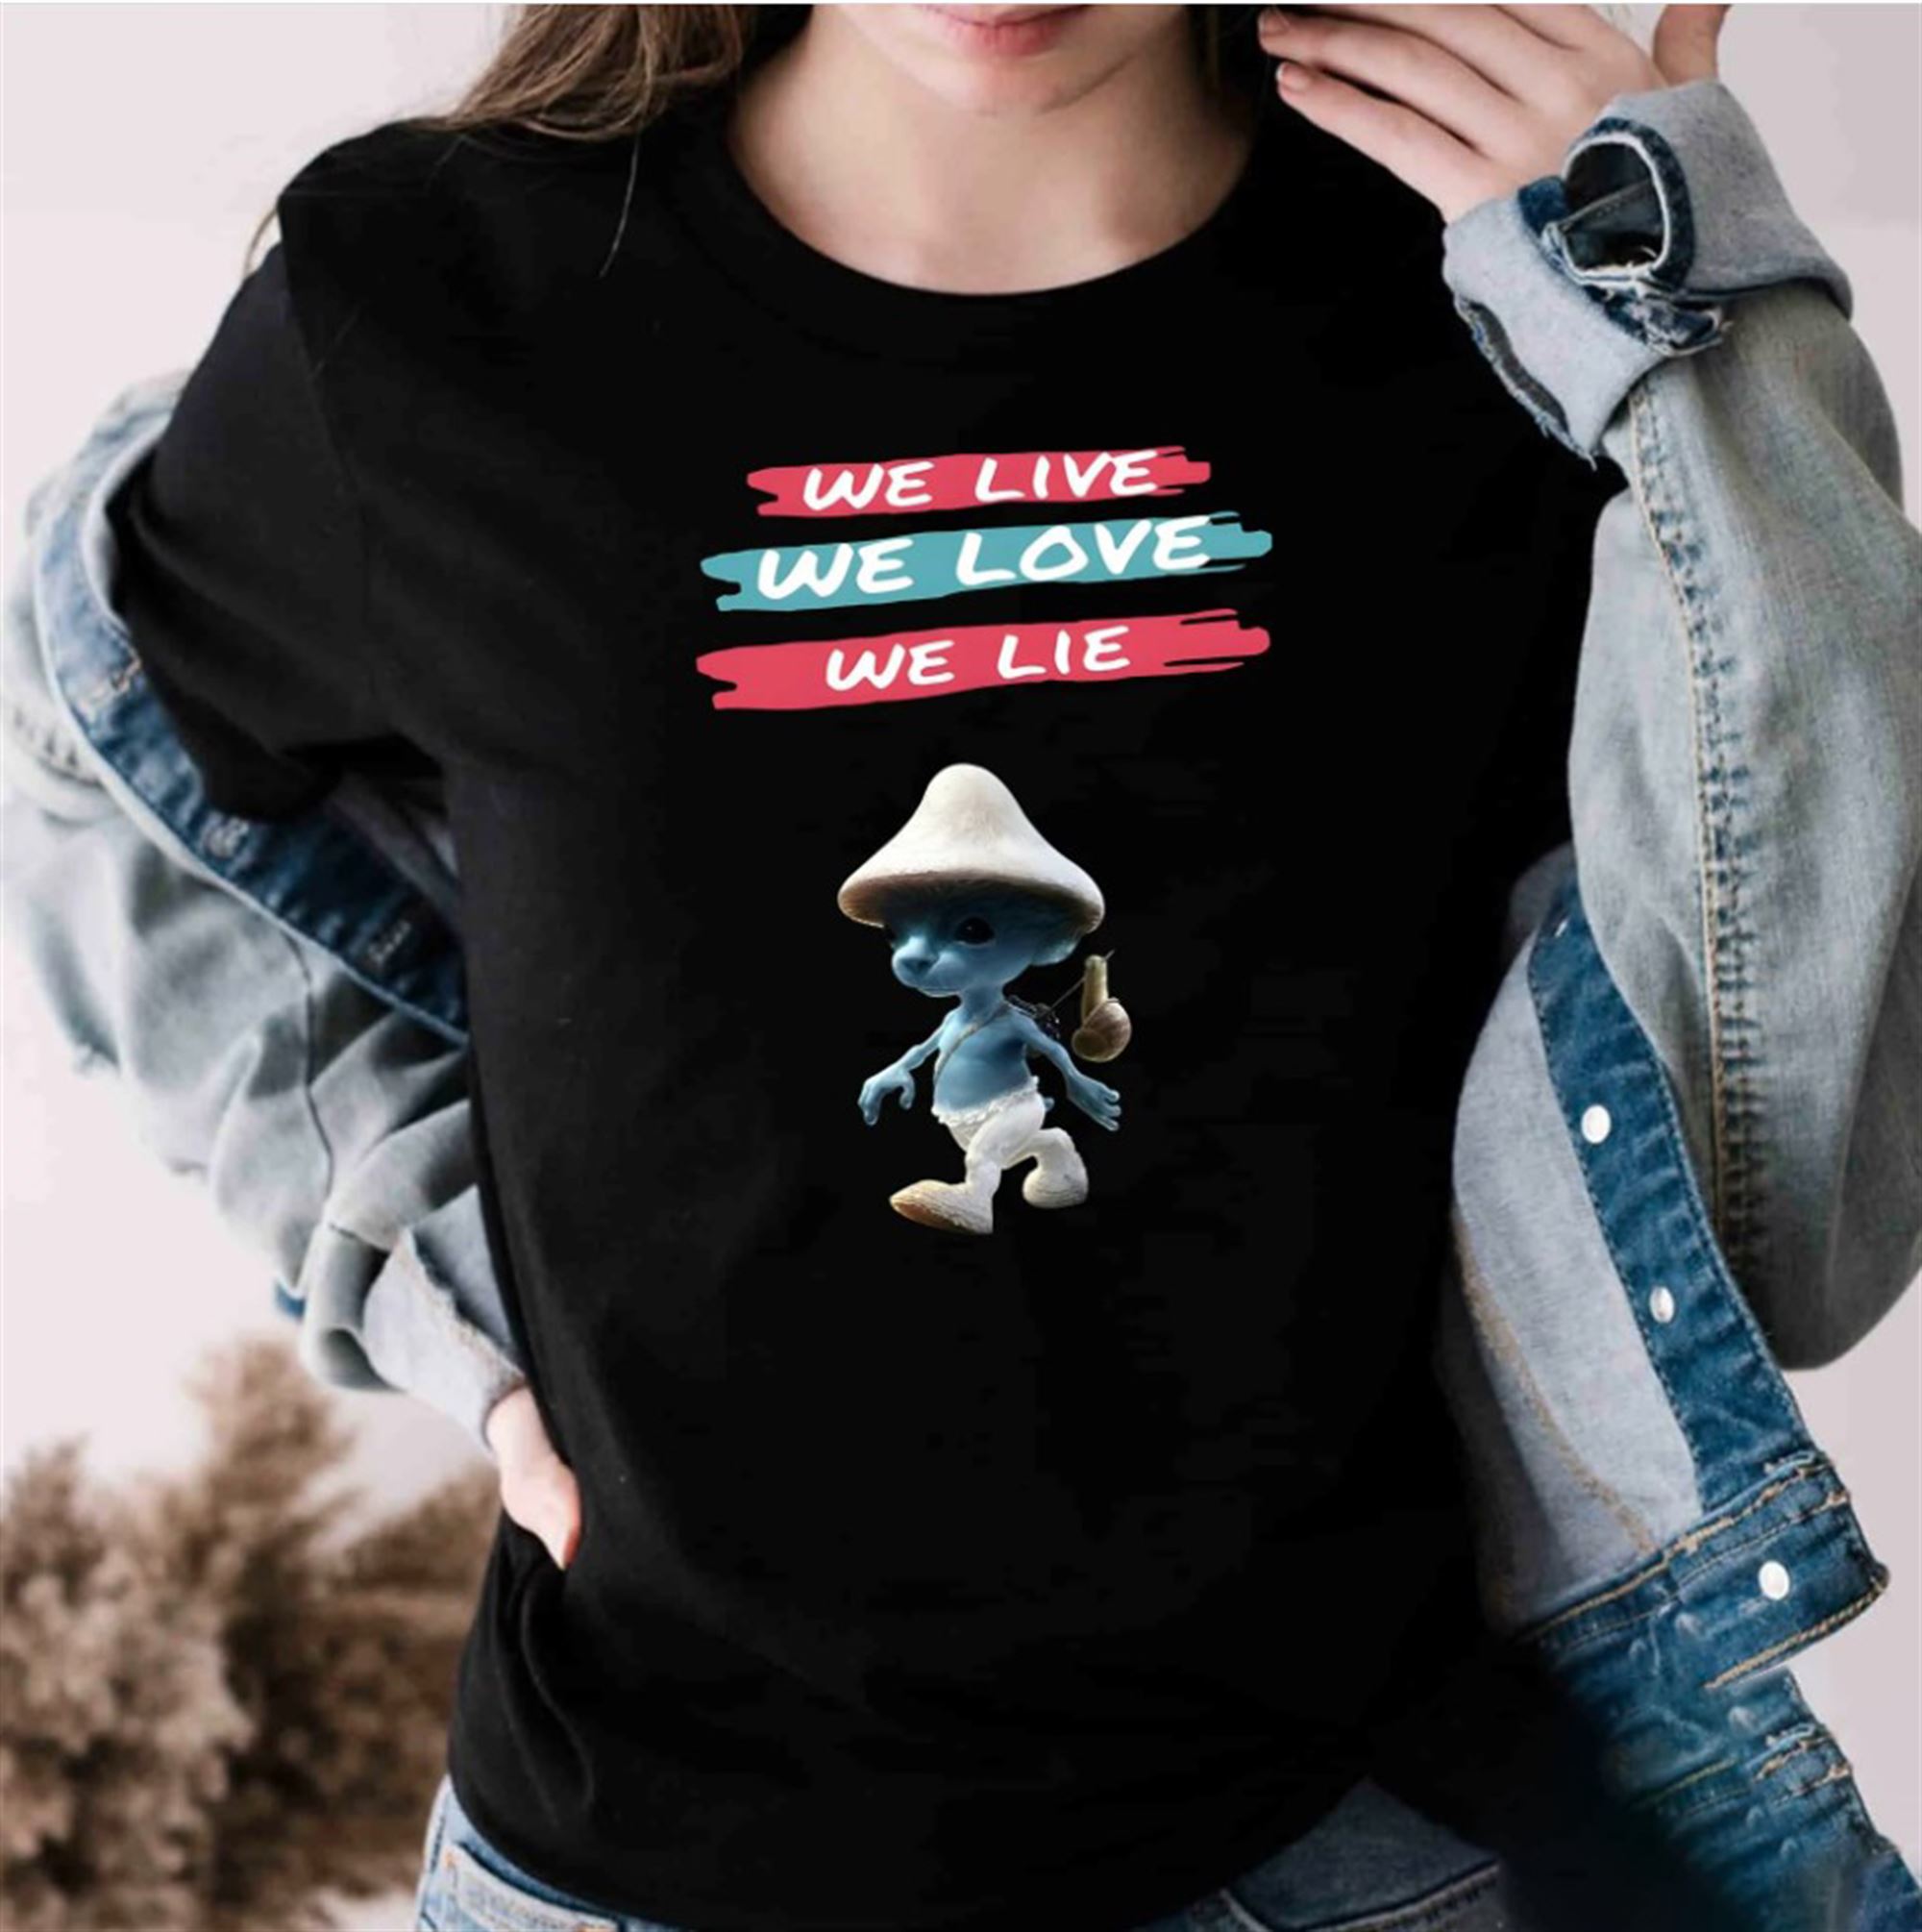 Smurf Cat Embrace Life Love And The Art Of Mystery With Our Shirt Plus Size Up To 5xl